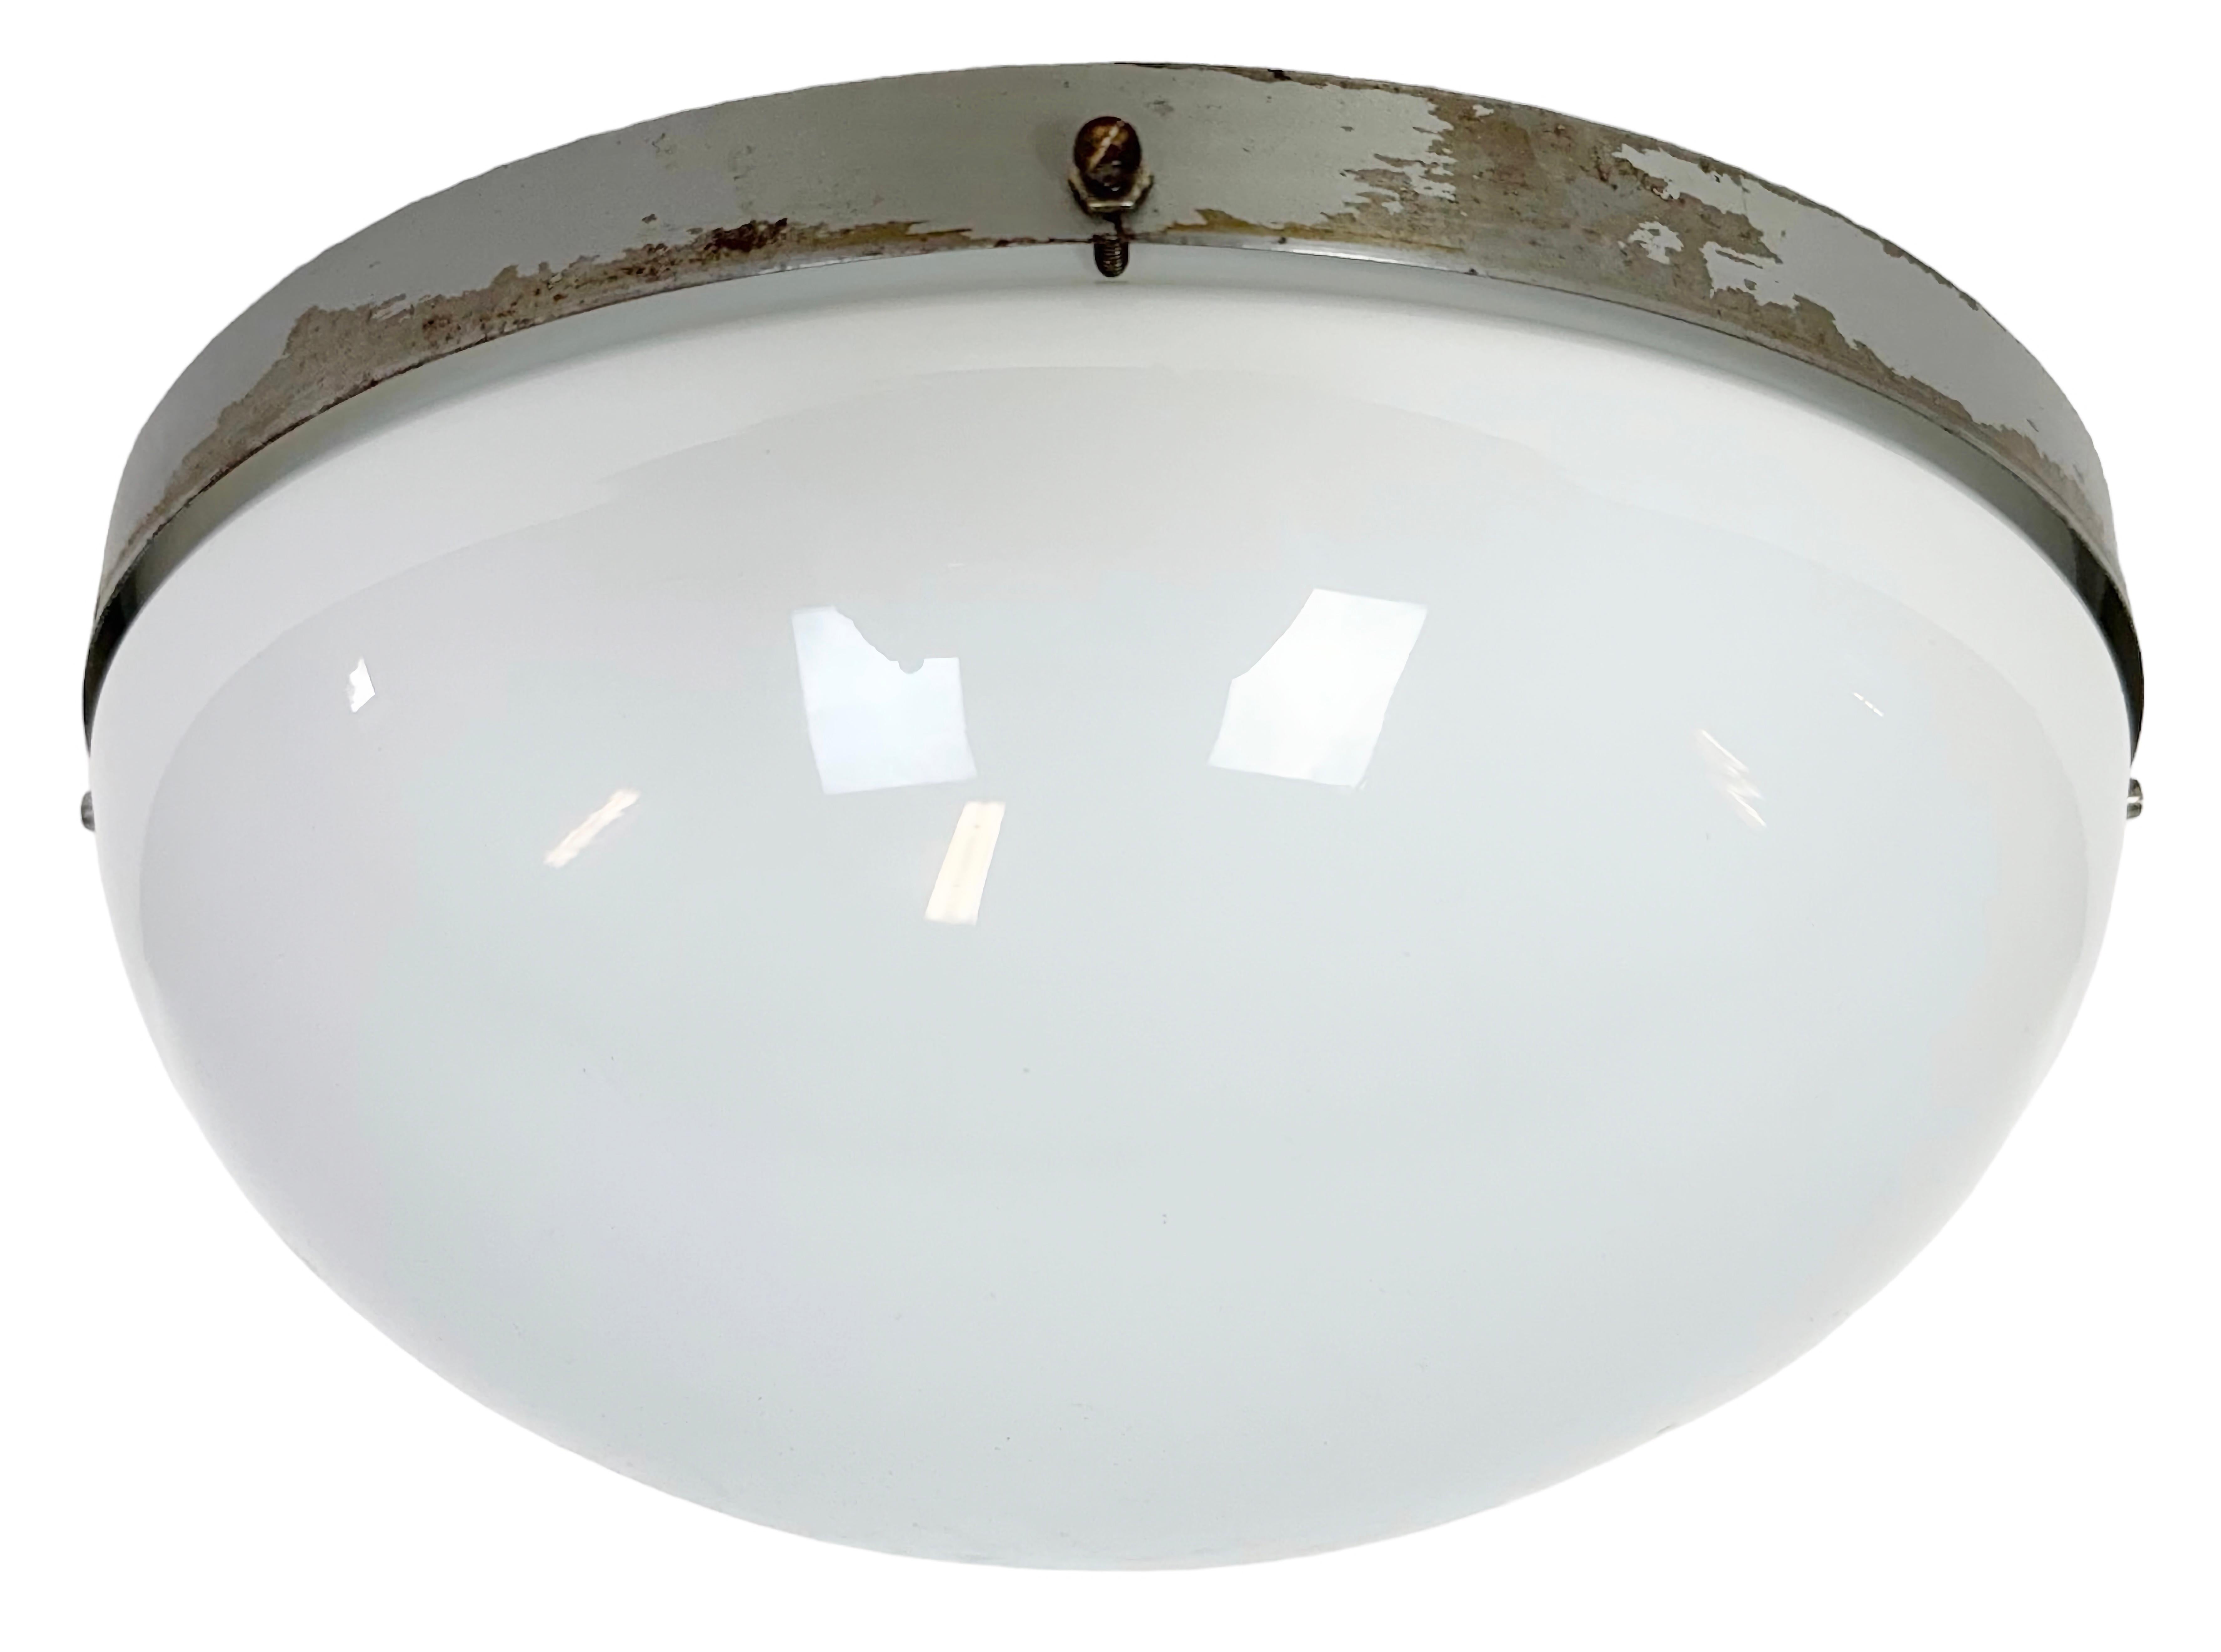 Vintage Industrial wall or ceiling lamp made by NAPAKO in former Czechoslovakia during the 1960s. Was used in factory offices and corridors. It features a grey metal back and a milk glass cover. The porcelain socket requires standard E 27/ E26 light